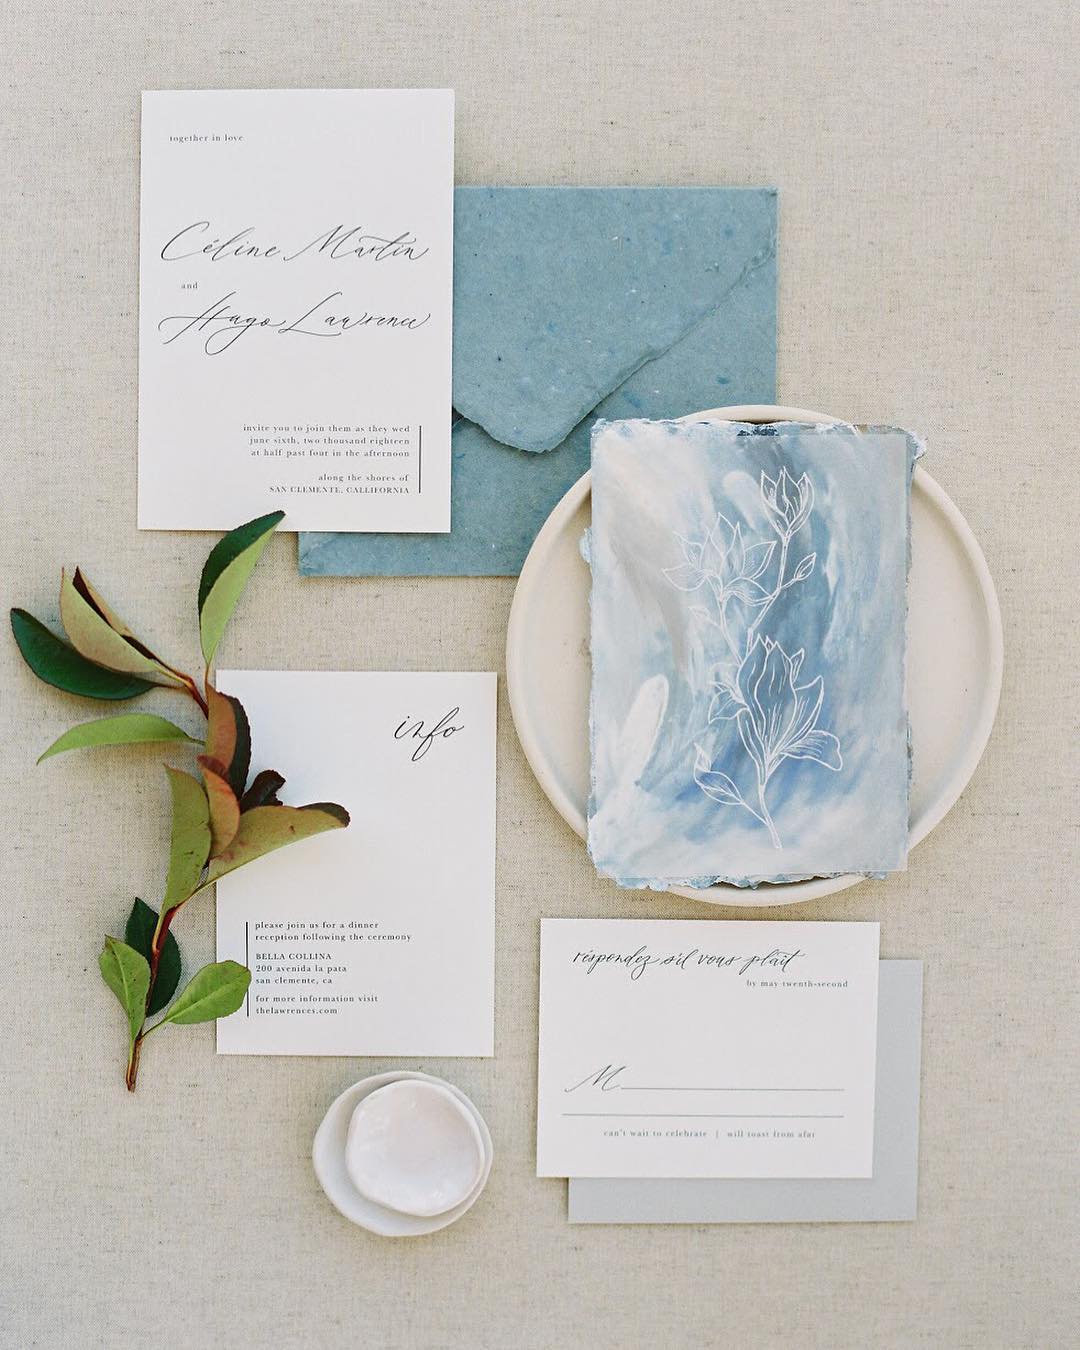 Elegant wedding invitations with deckle edge envelopes and a dusty blue art card by Dominique Alba | Photography and styling by  Sara Weir